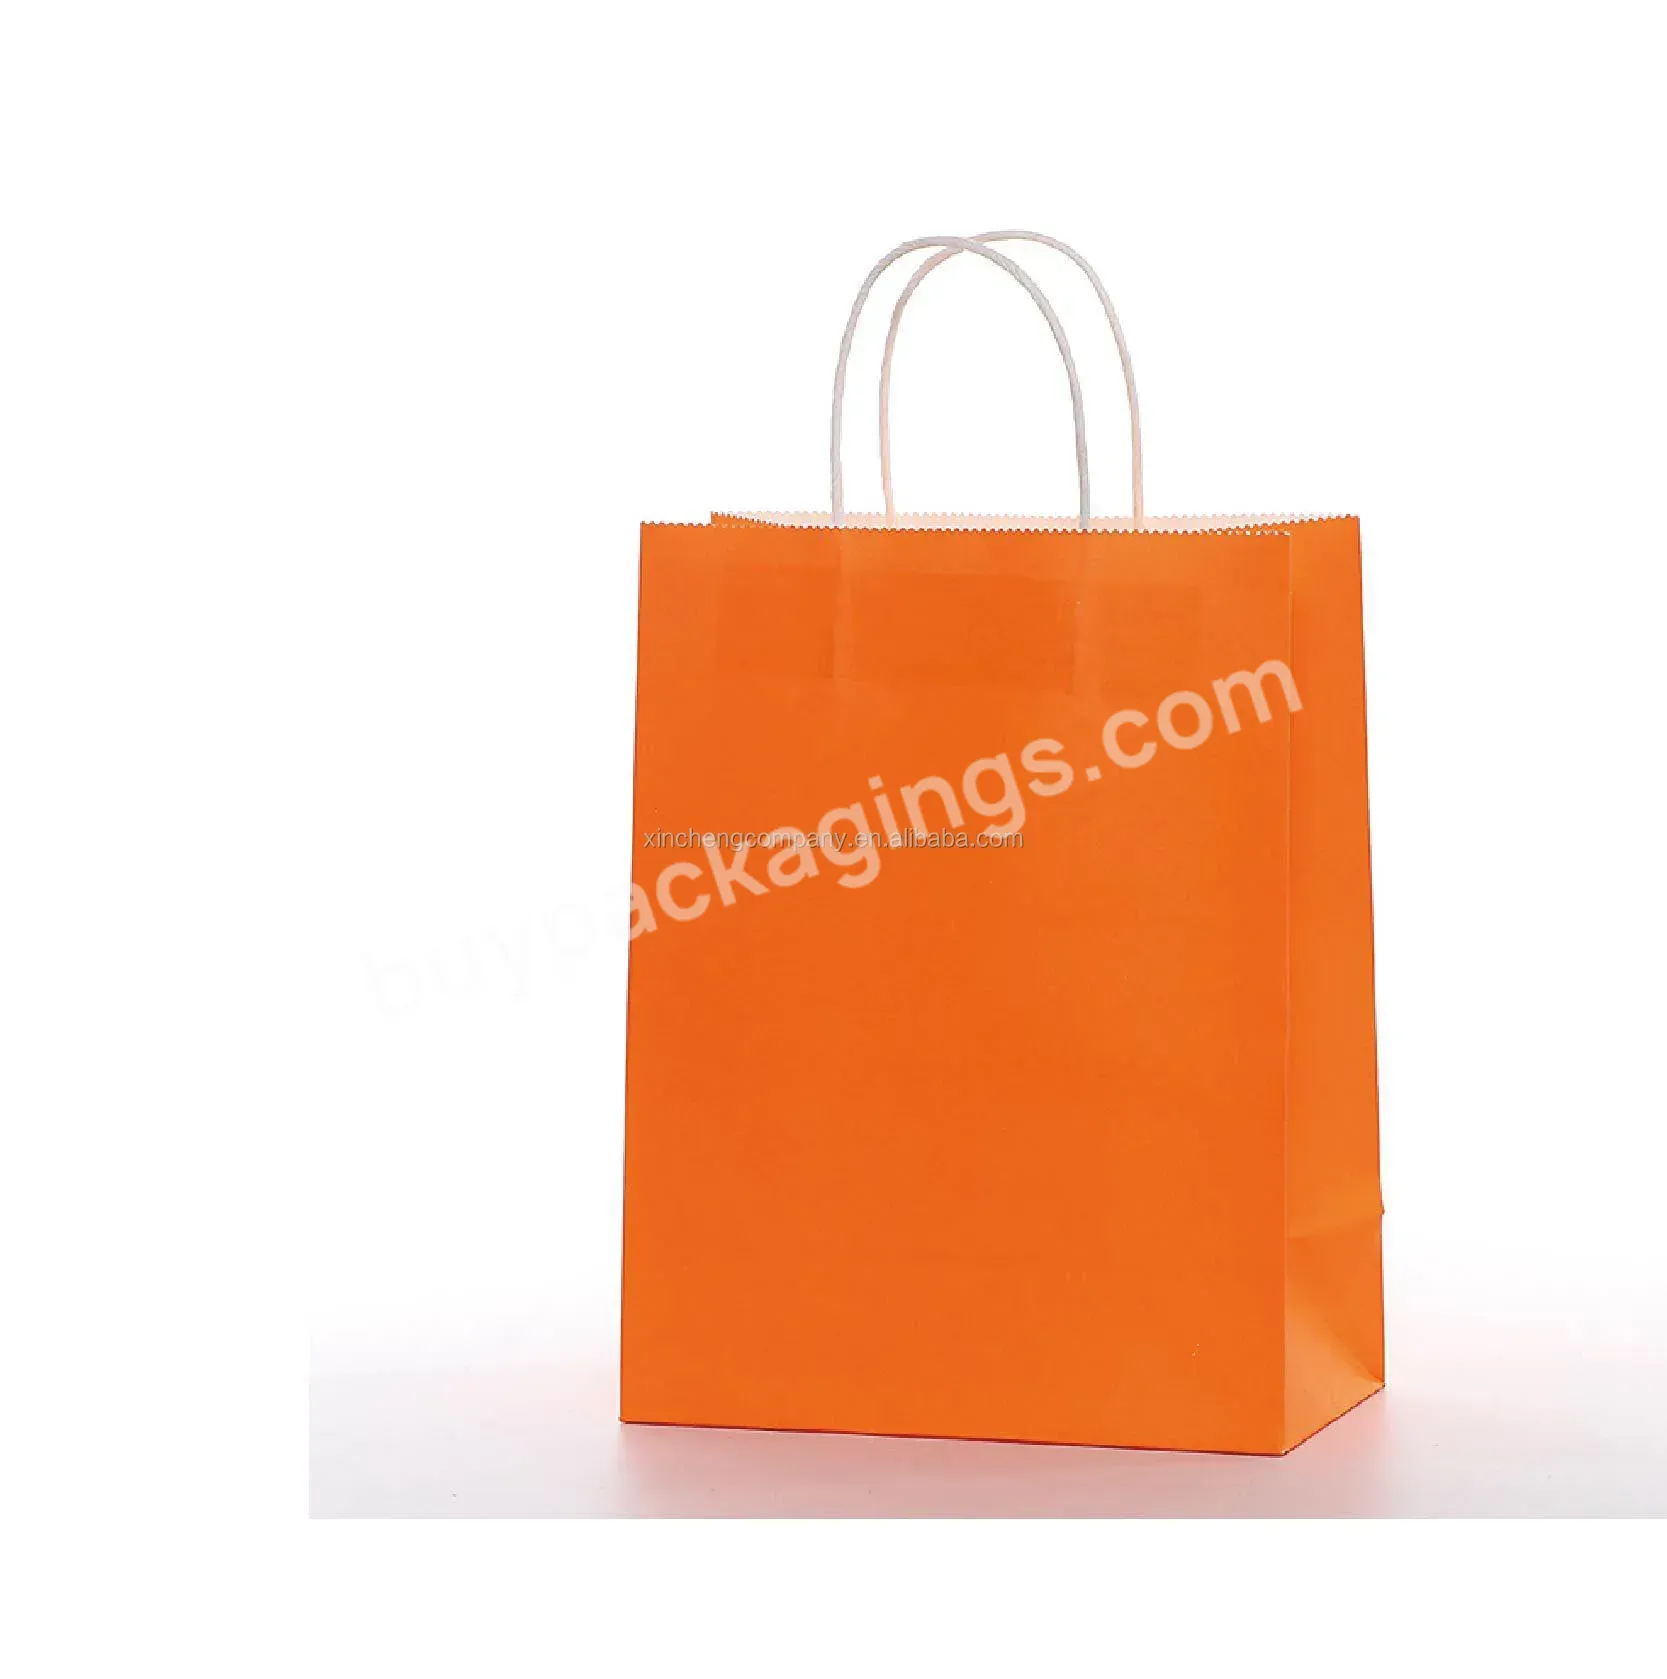 Wholesale White Reusable Shopping Bag Customized Luxury Christmas Packaging Gift Bags Kraft Paper Bags